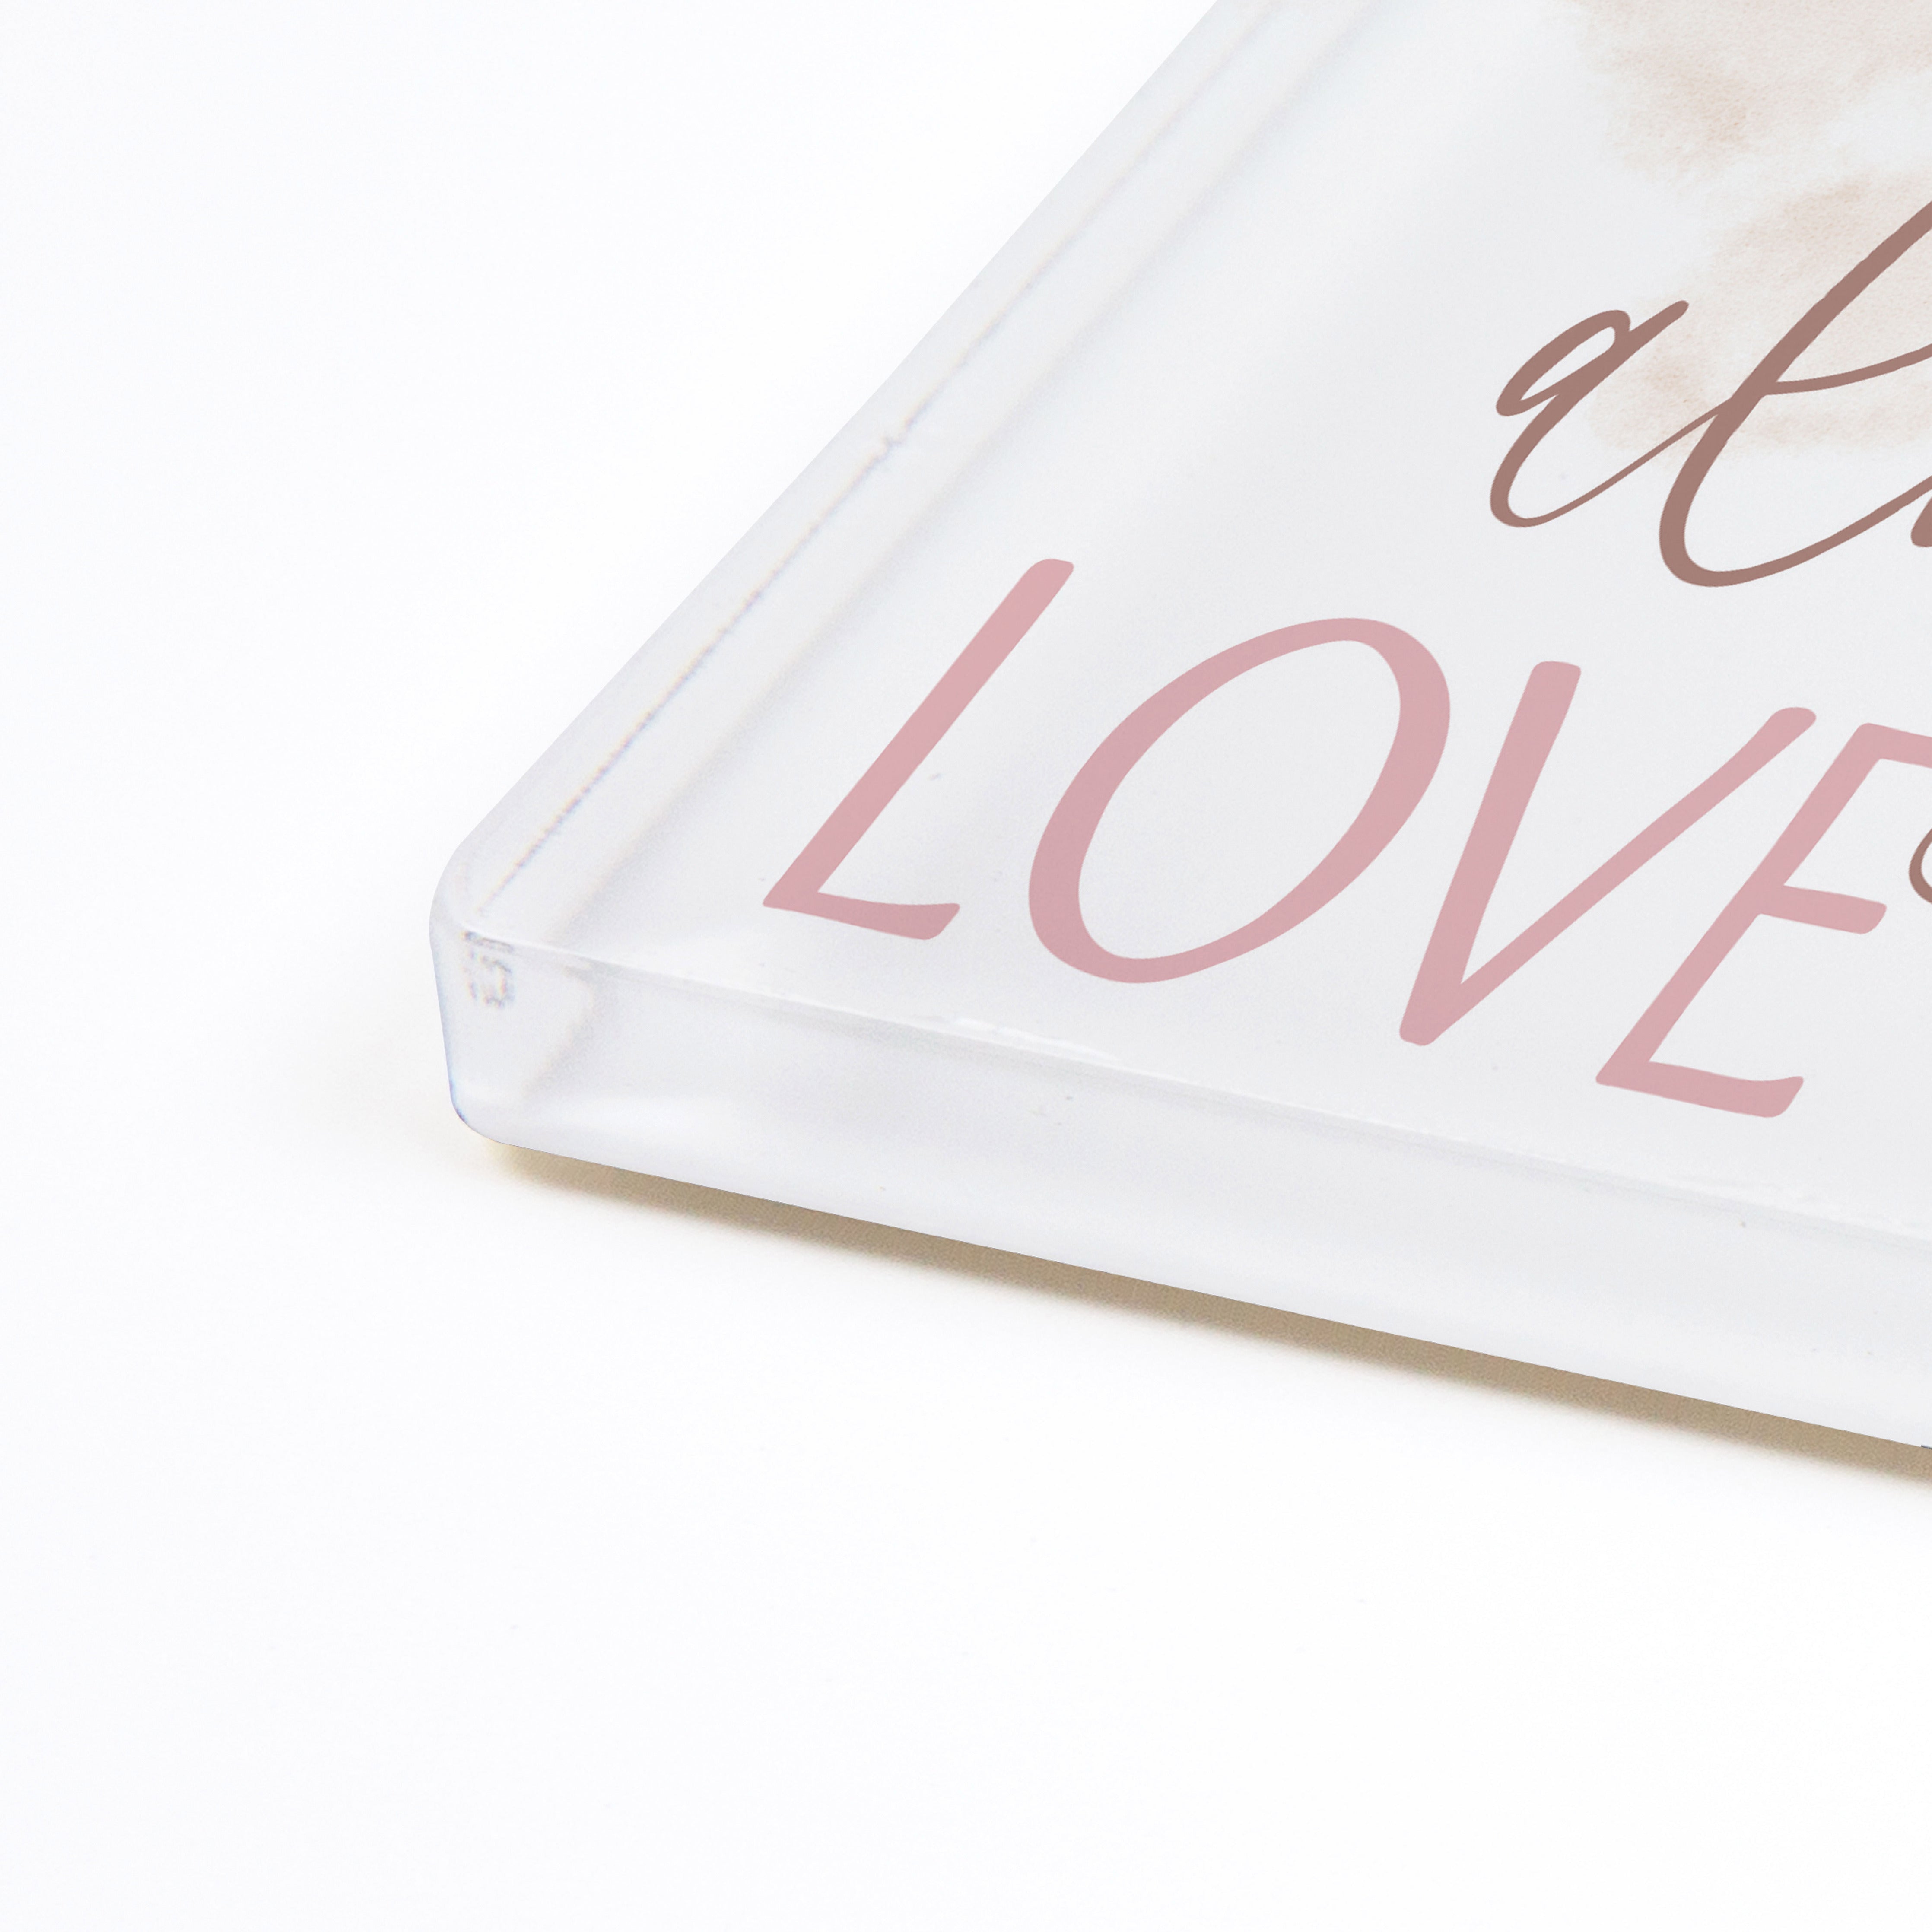 I Shell Always Love You Acrylic Square Magnet